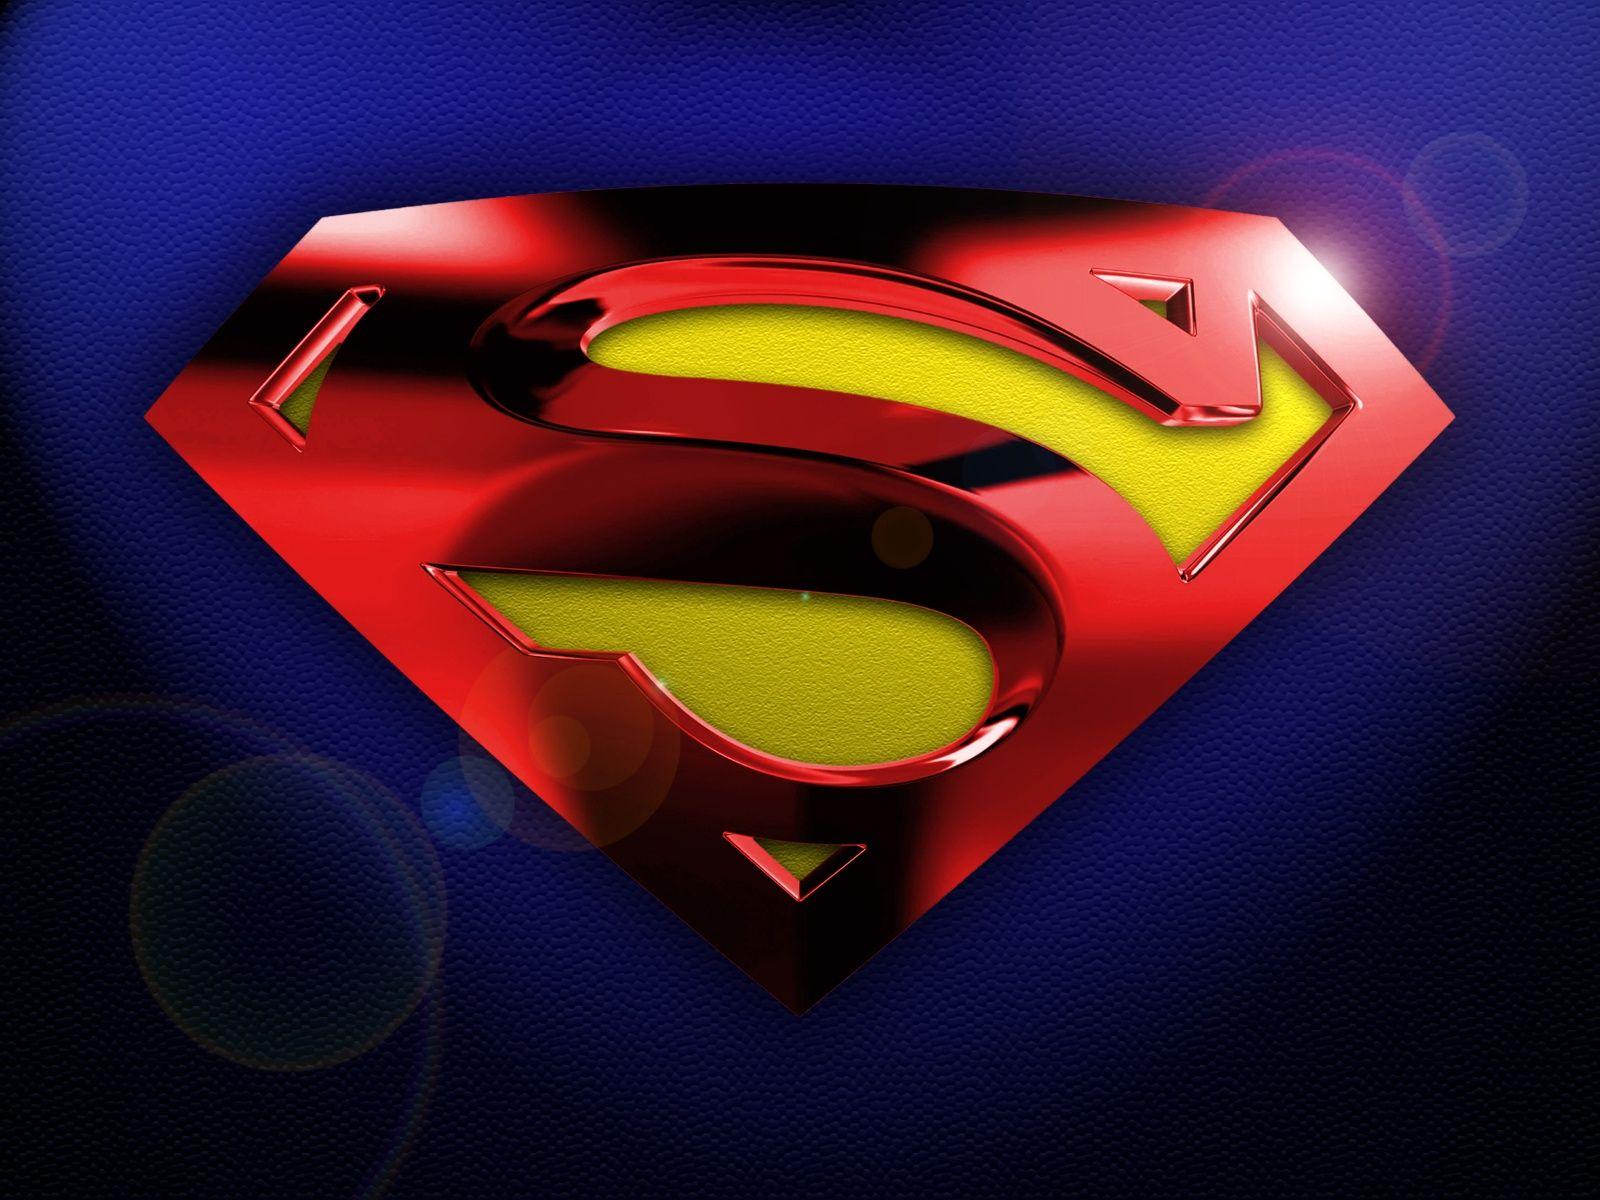 Awesome Superman Logo 3D Wallpaper. Download cool HD wallpaper here